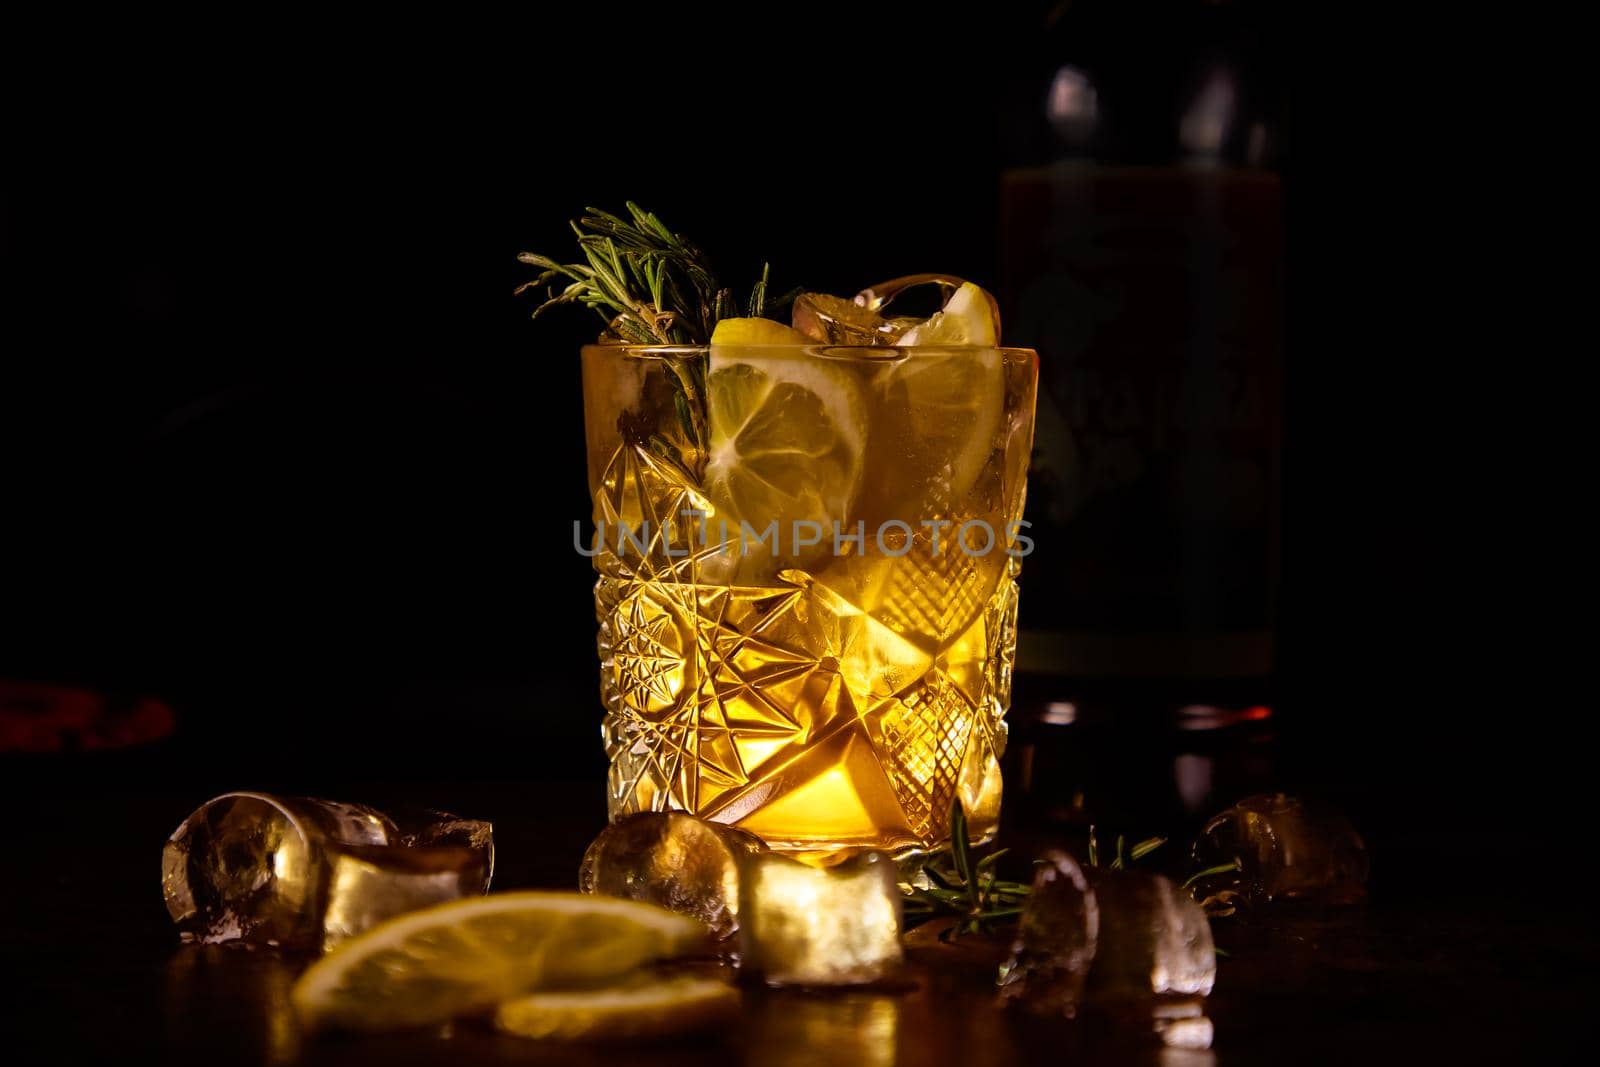 Red cocktail with lemon slice and Apple by Milanchikov